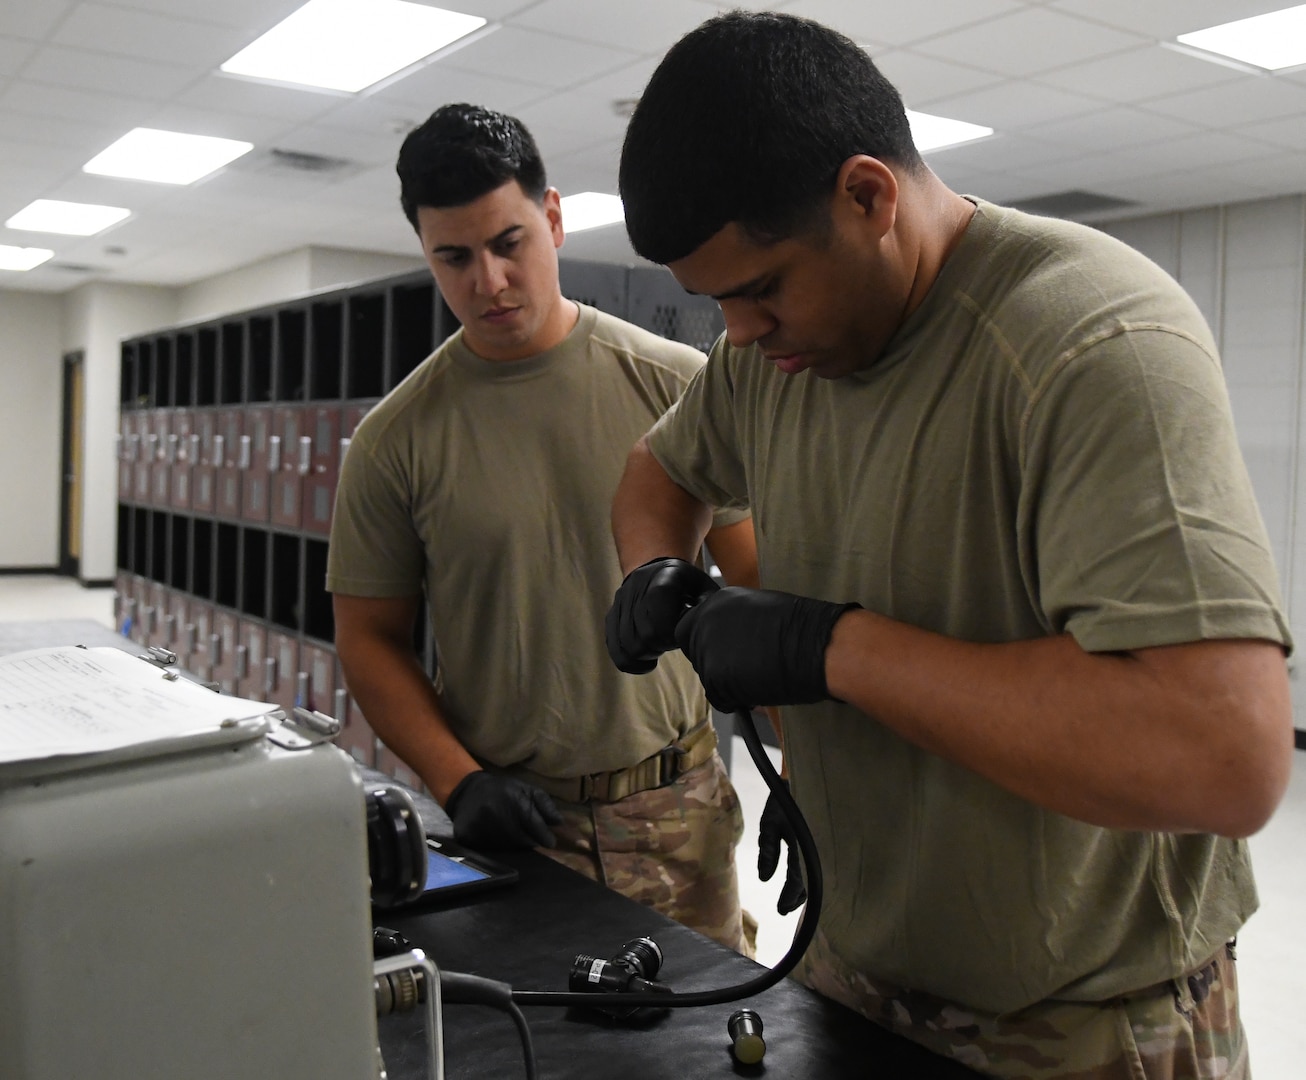 Technical Sgt. Stephen Diaz and Staff Sgt. Emanuelle Negron, 920th Operations Support Squadron aircrew flight equipment craftsmen, perform helmet inspections for aircrew use at Patrick Space Force Base, Fla., April 2, 2022. AFE is a team of 27 Airmen whose main role is to maintain, test, and inspect the flight gear used by all aircrew. (U.S. Air Force photo by Staff Sgt. Darius Sostre-Miroir)